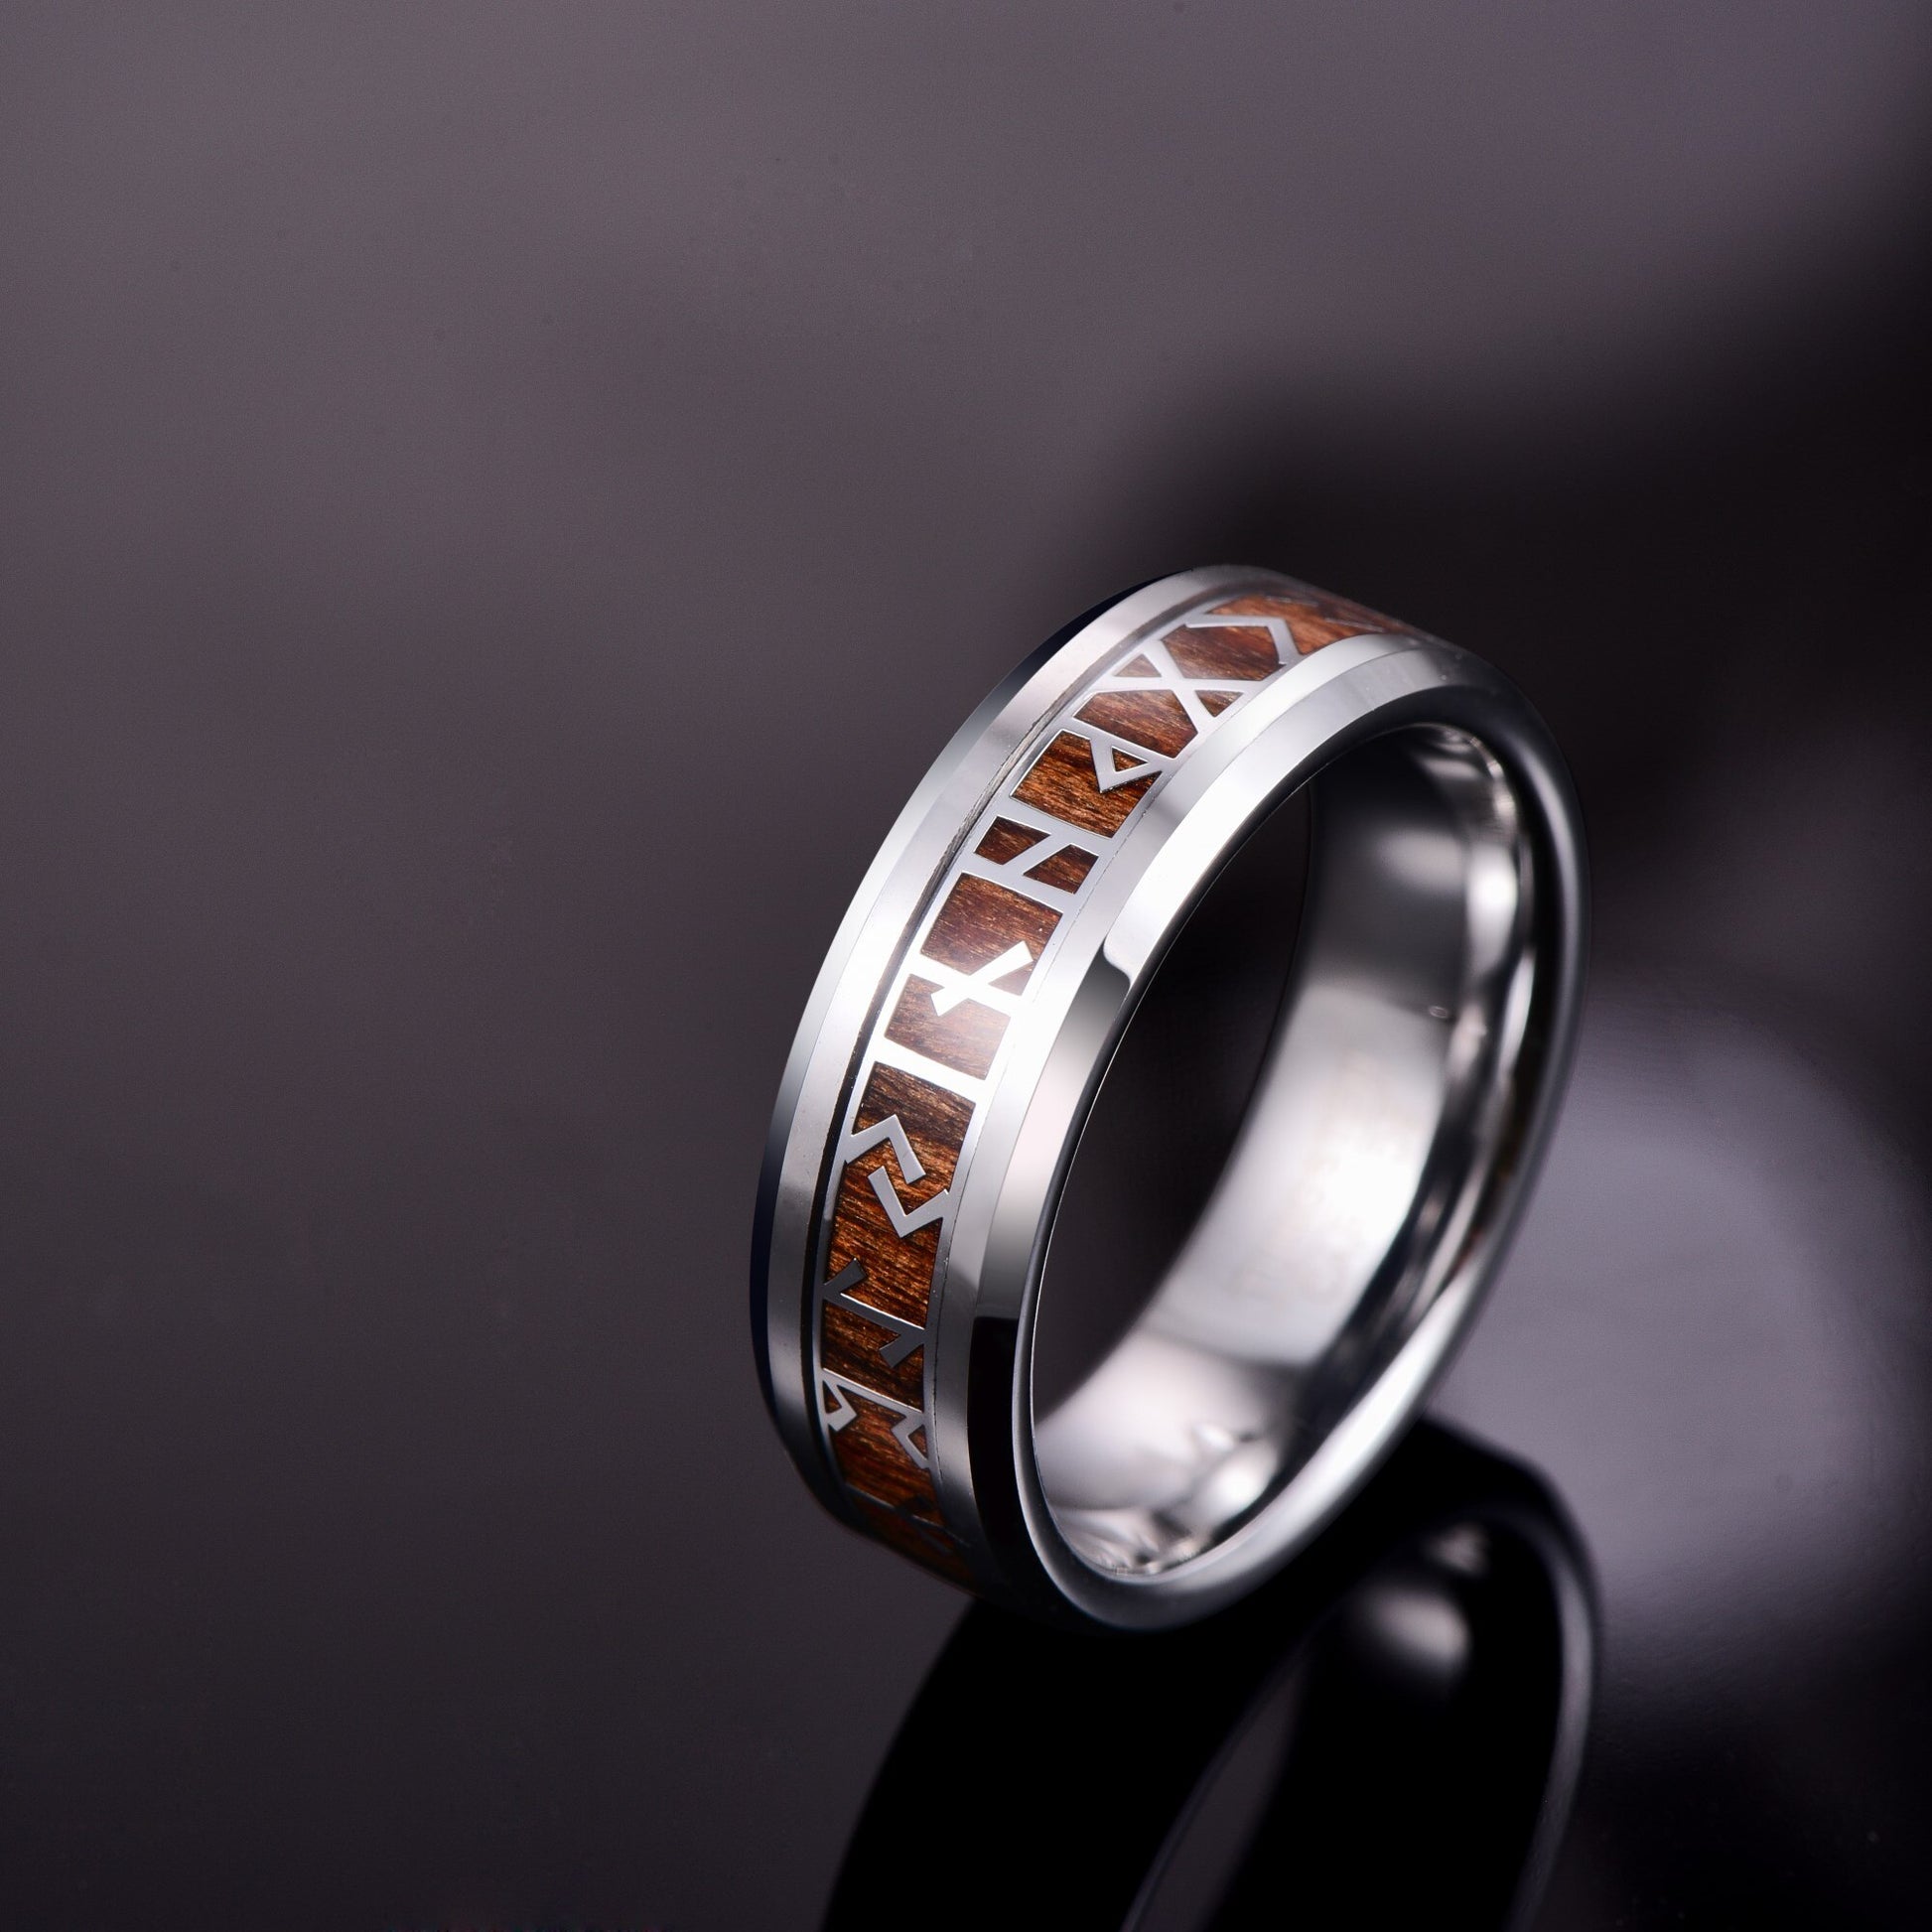 Viking Rune Ring in Tungsten Carbide with Wood Inlay Groove 8mm wide